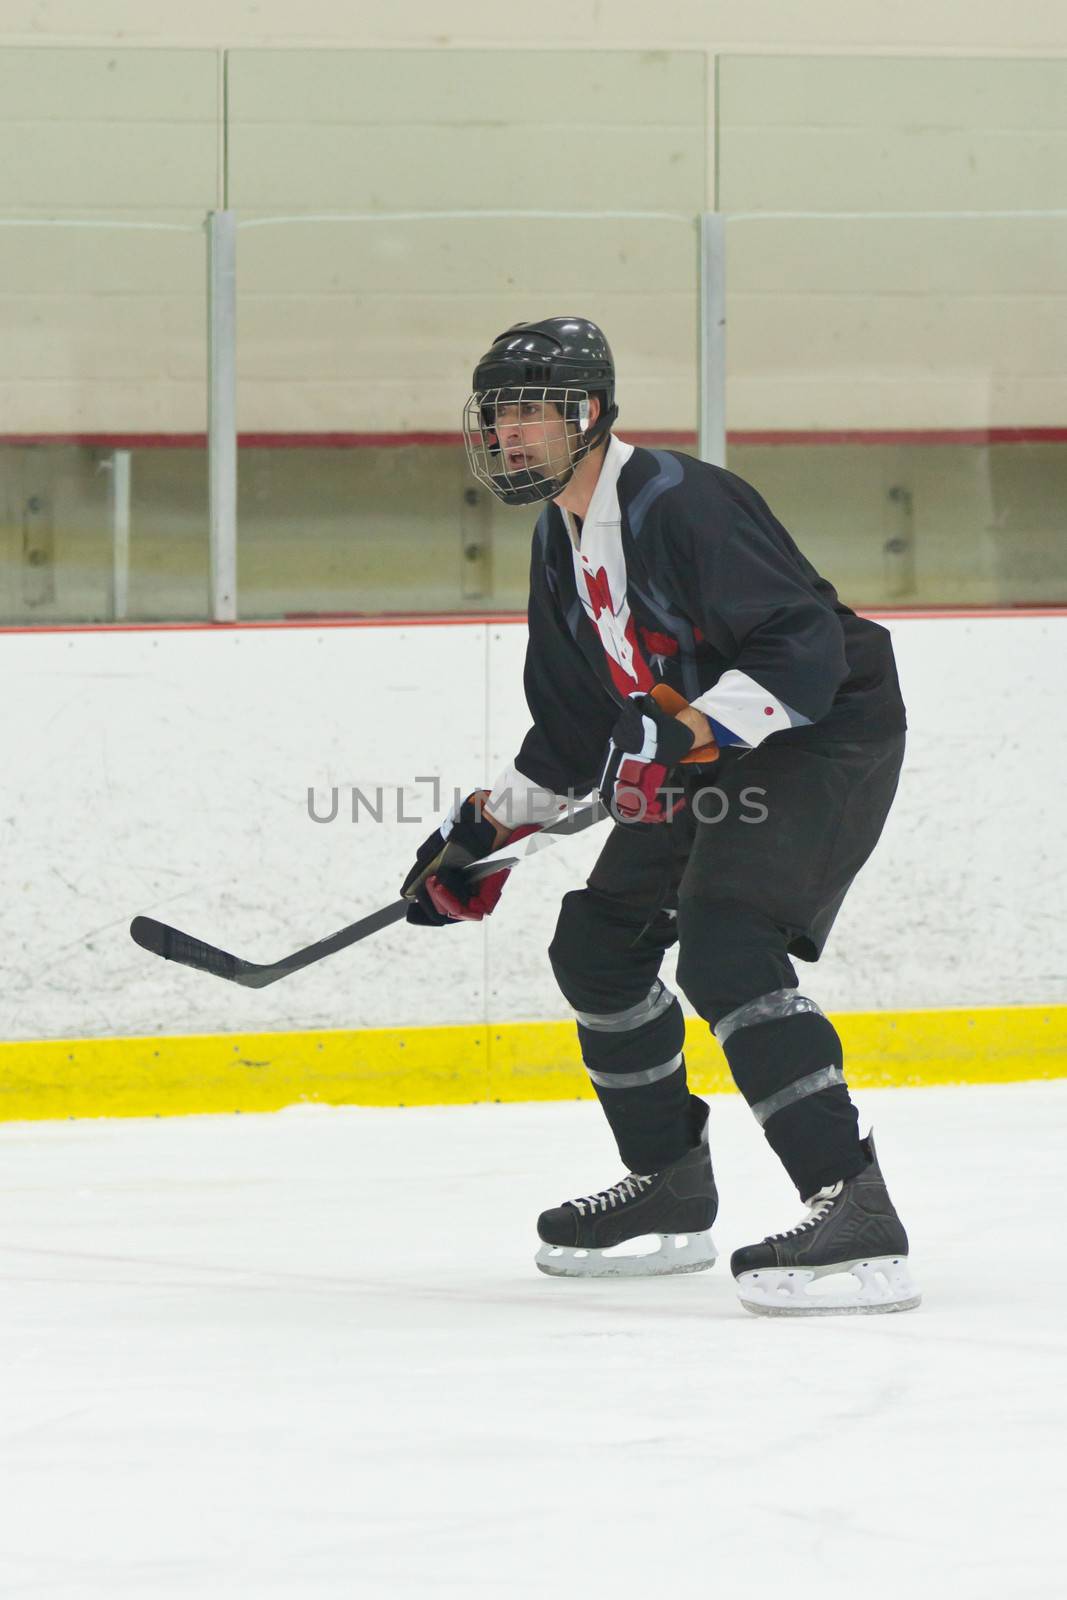 Ice hockey player during a game by bigjohn36